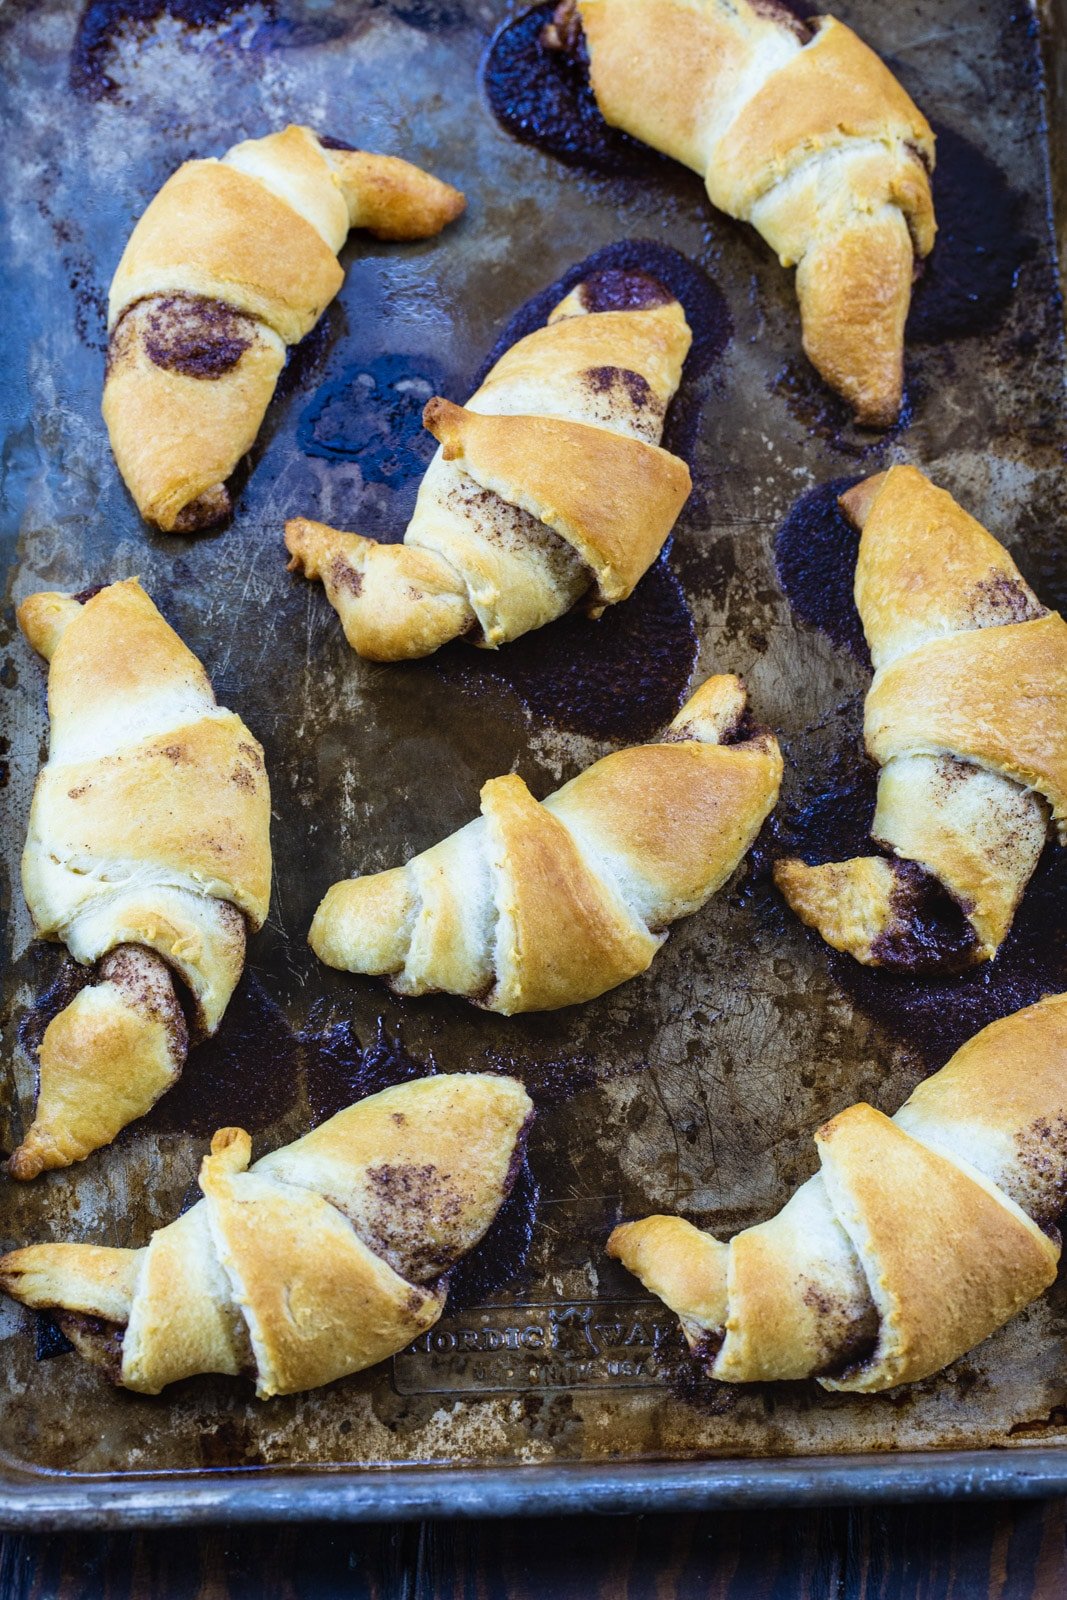 Cooked crescents on a baking sheet.